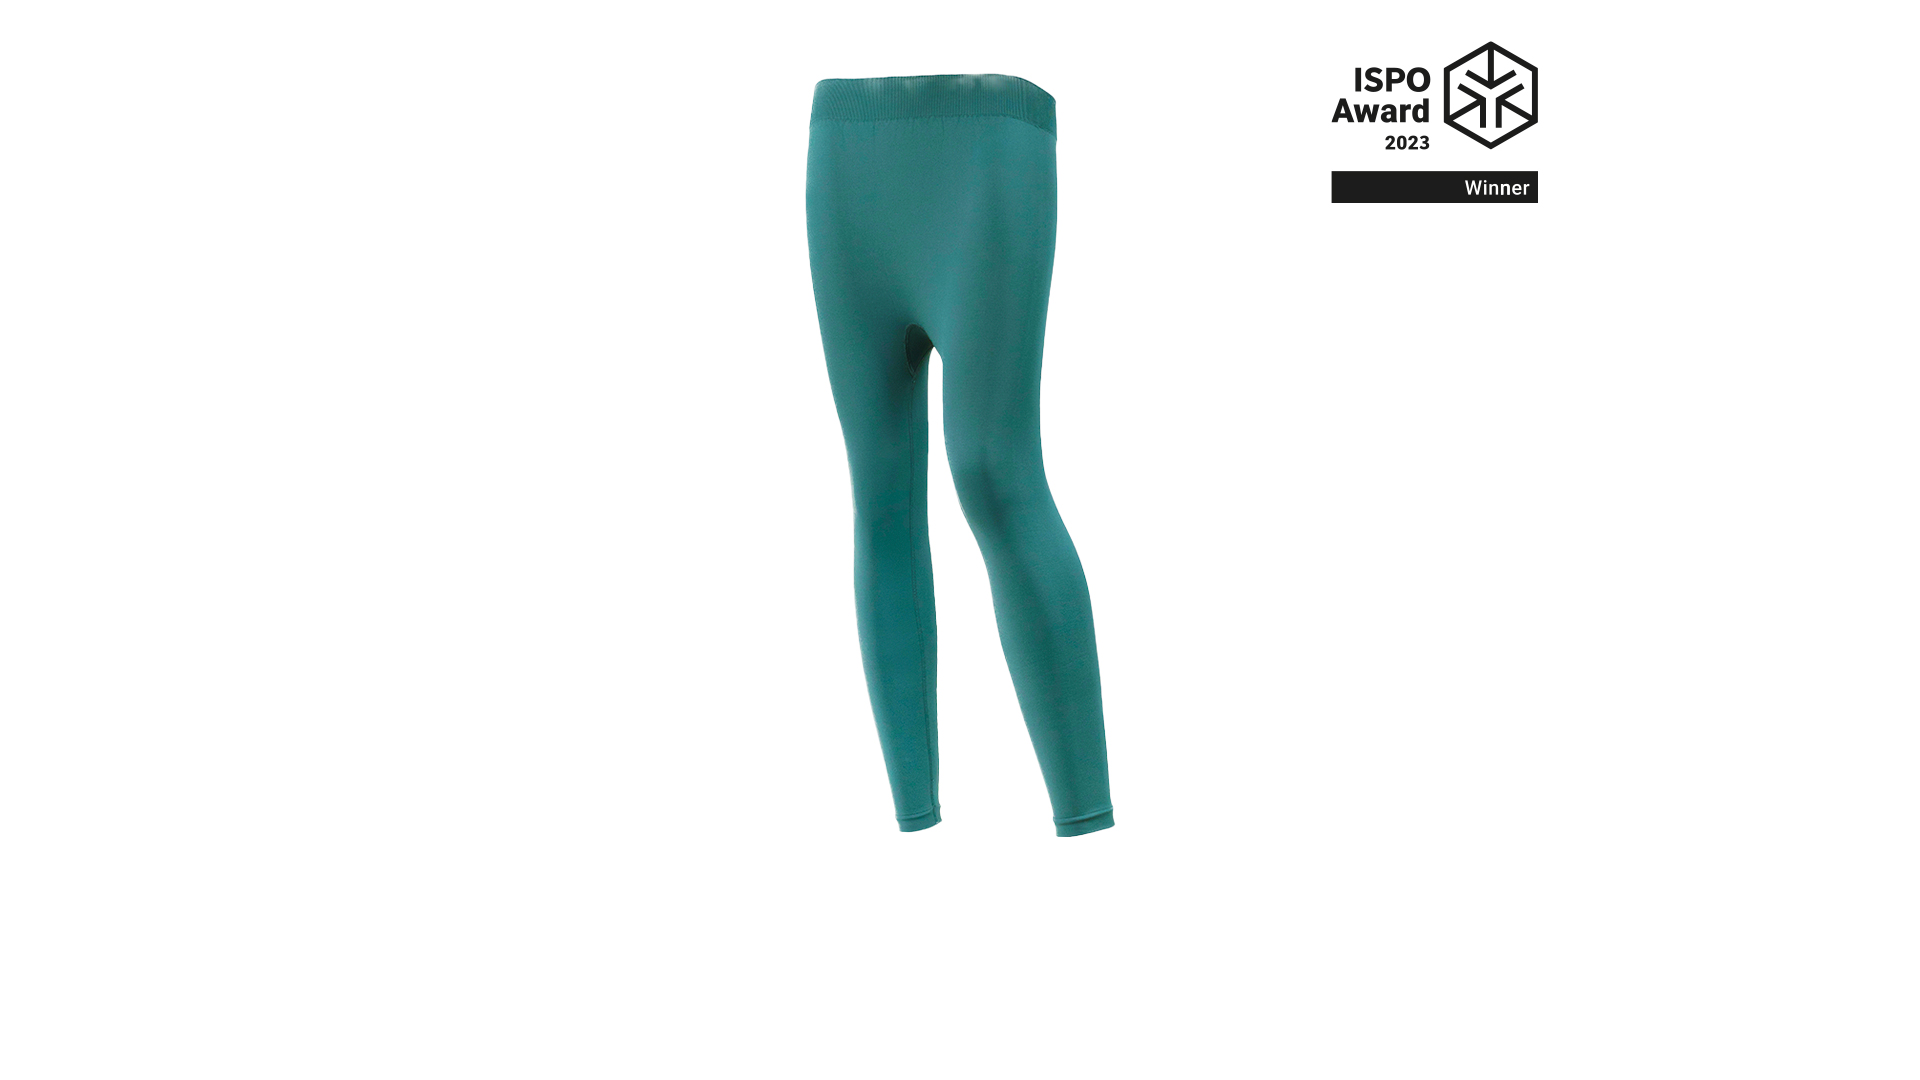 Femography (Become) Absorbent Menopause Leggings has won the ISPO Award  2023.